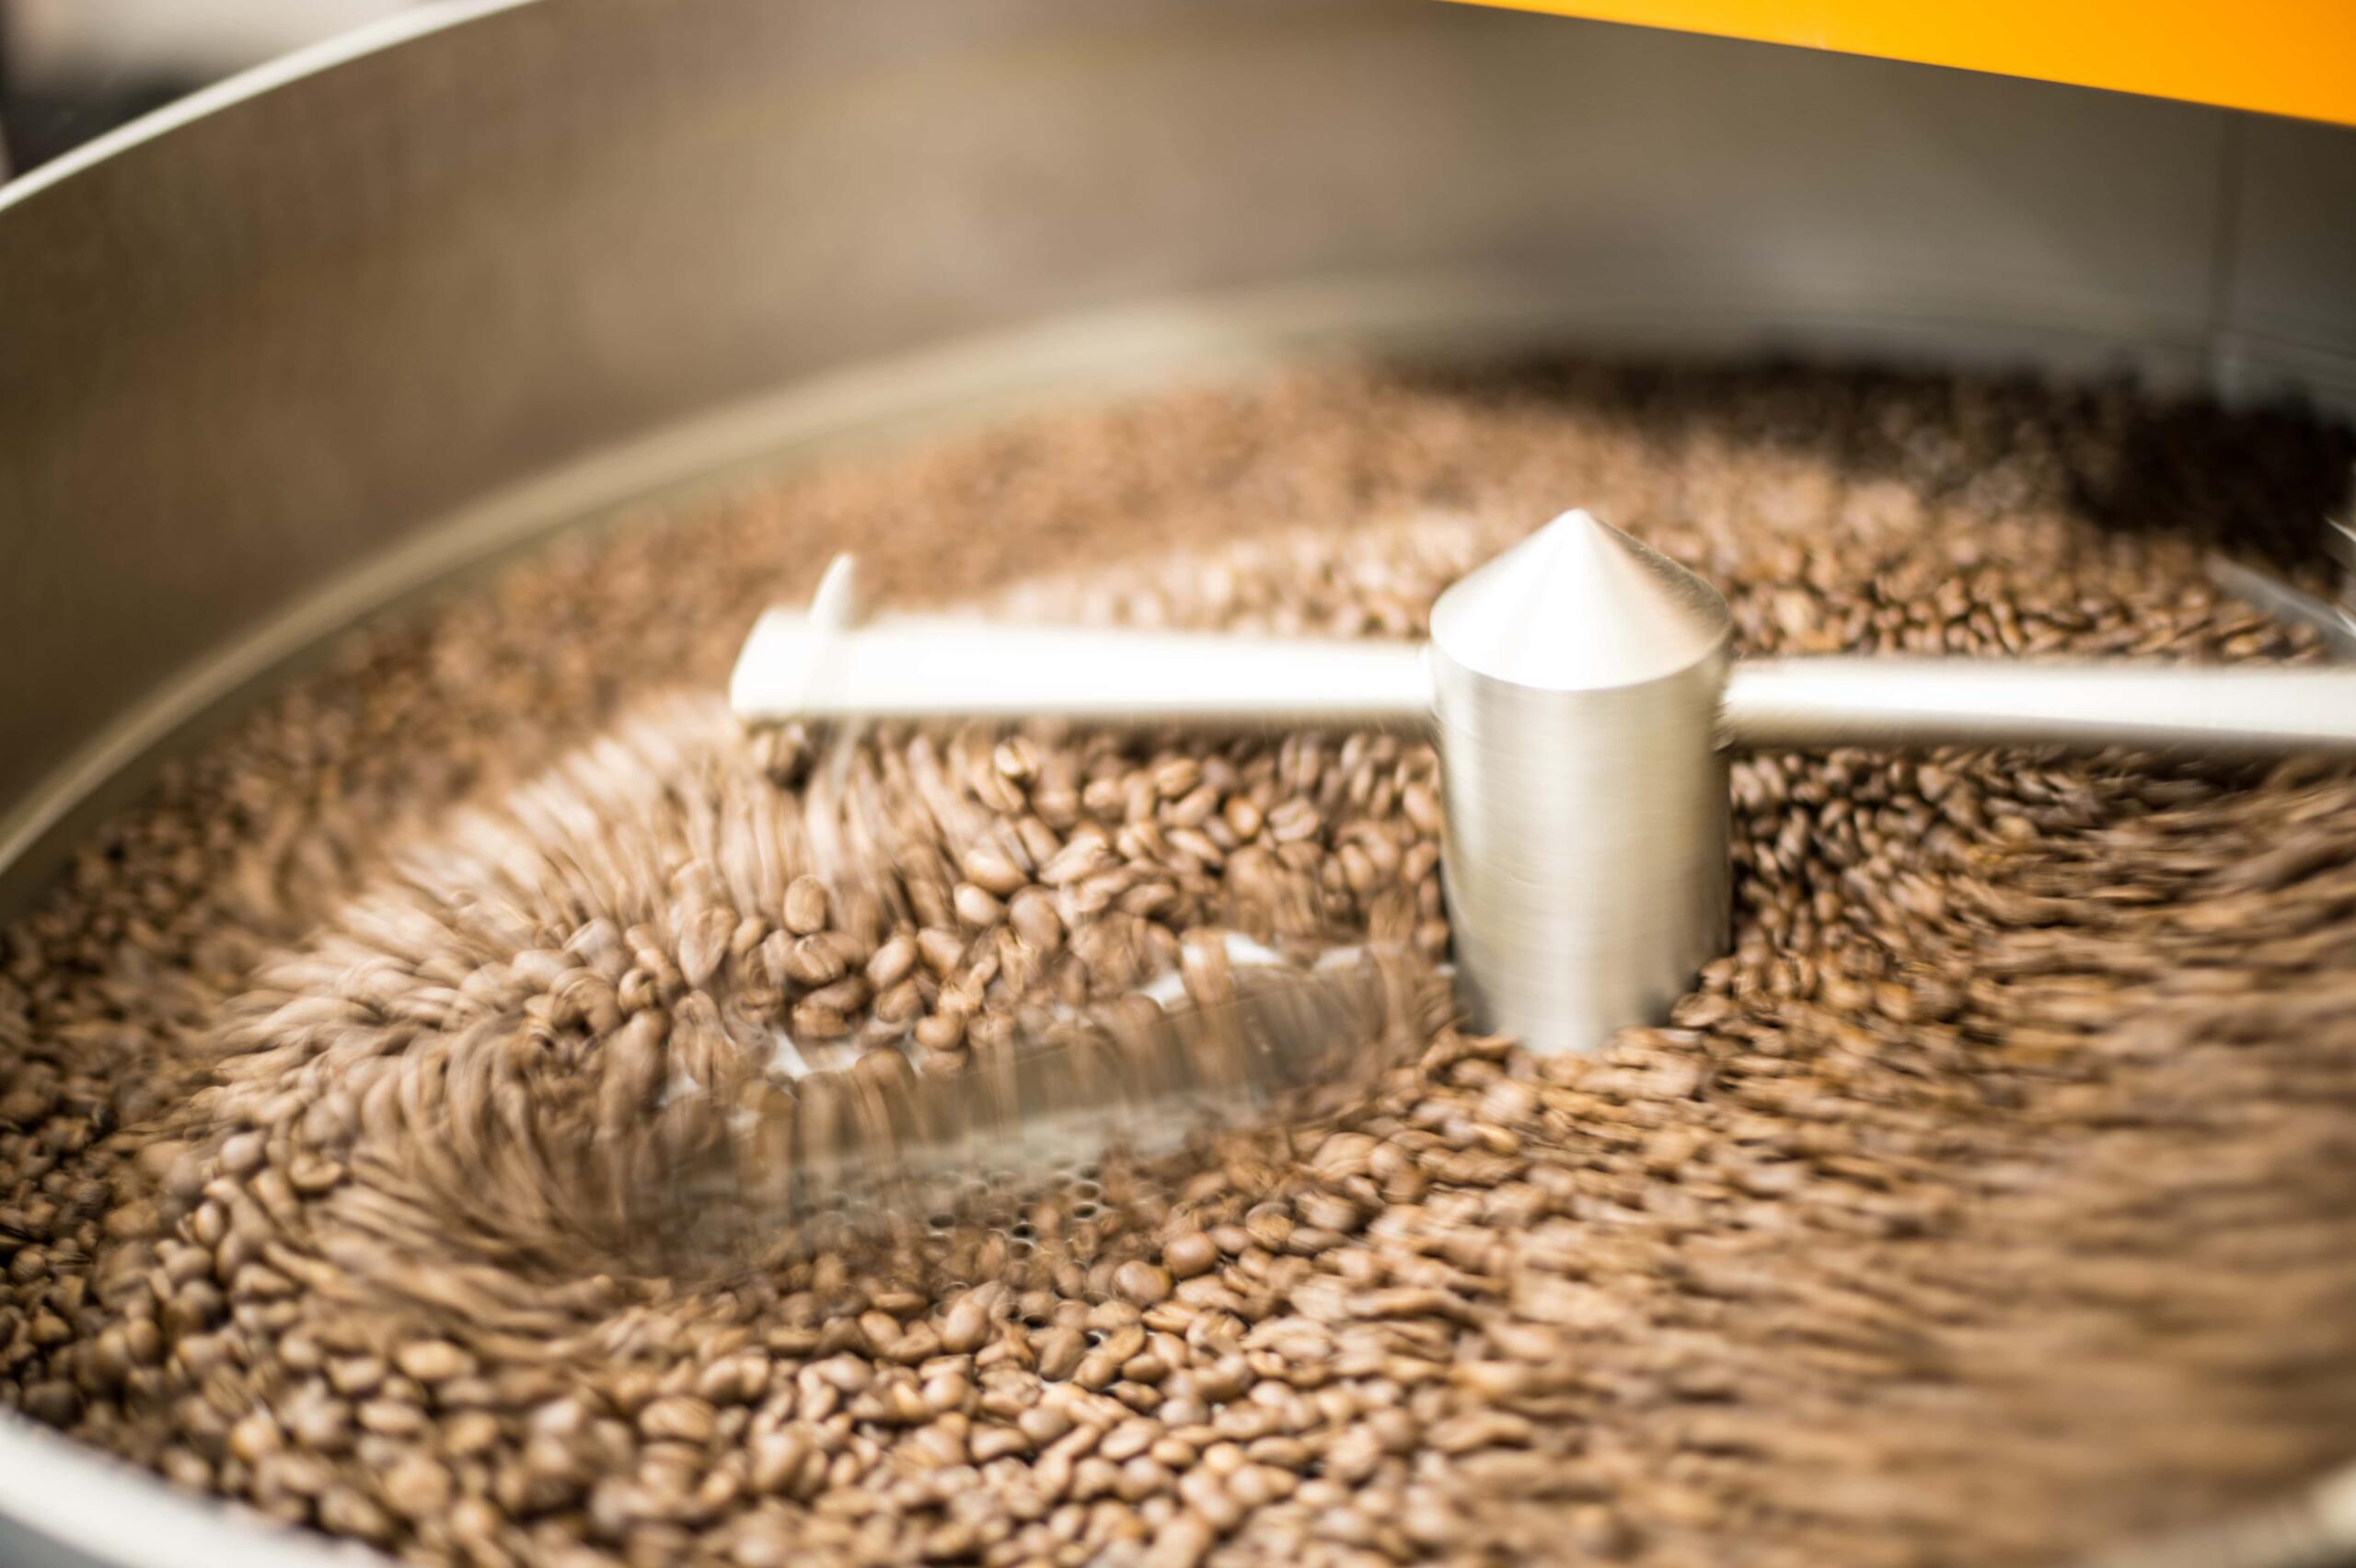 Roasted coffee beans being pushed around a coffee cooling bin